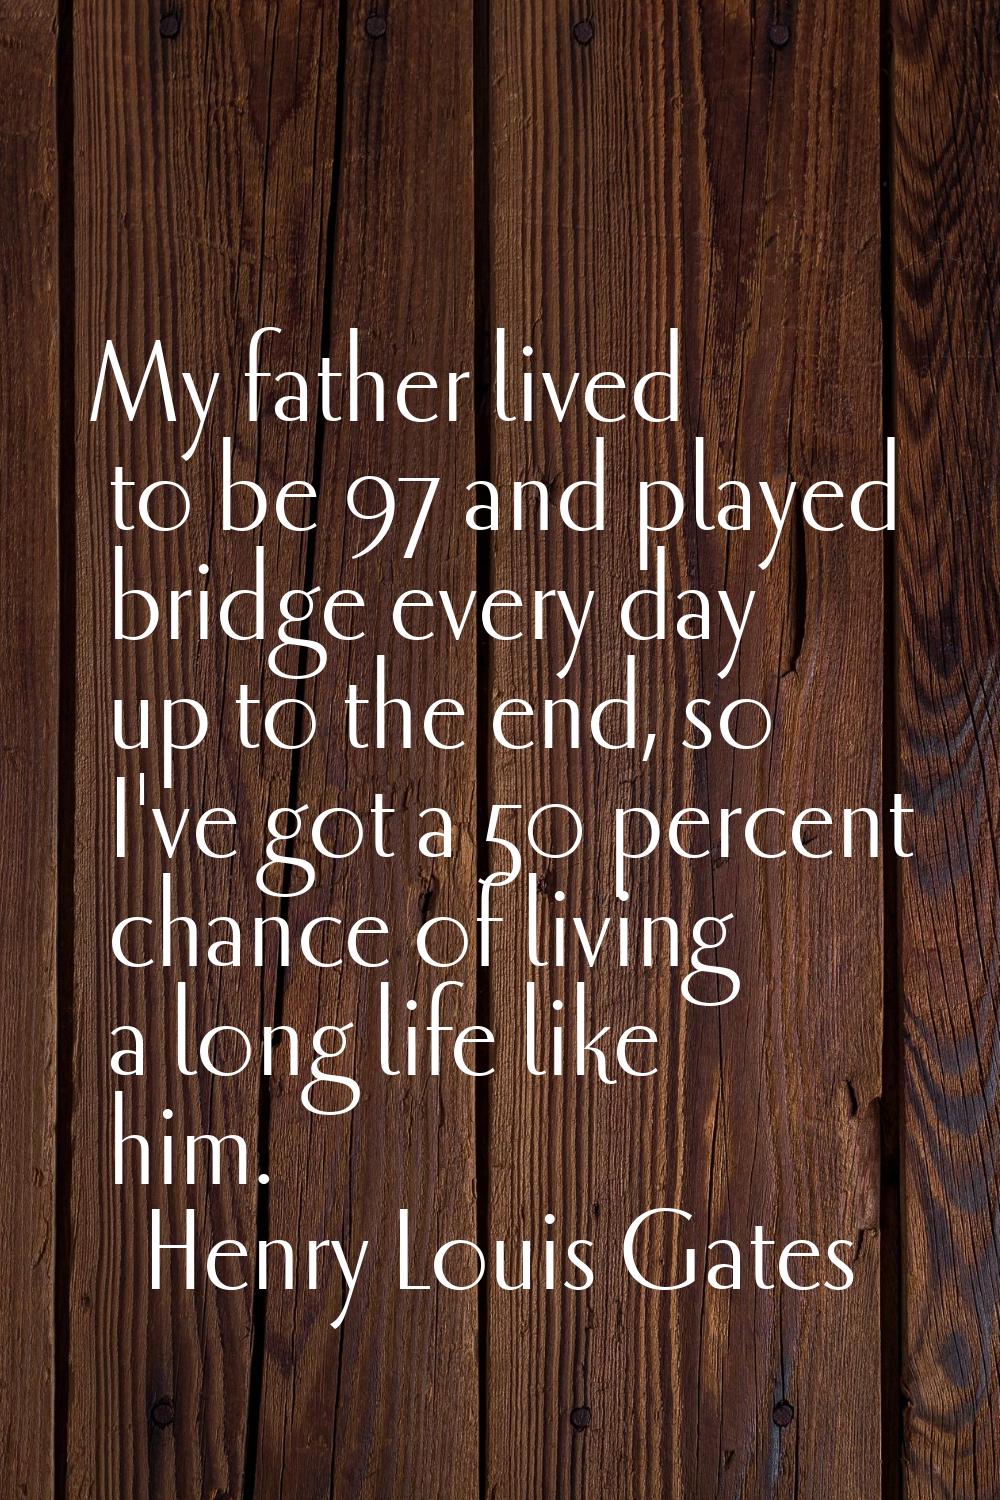 My father lived to be 97 and played bridge every day up to the end, so I've got a 50 percent chance